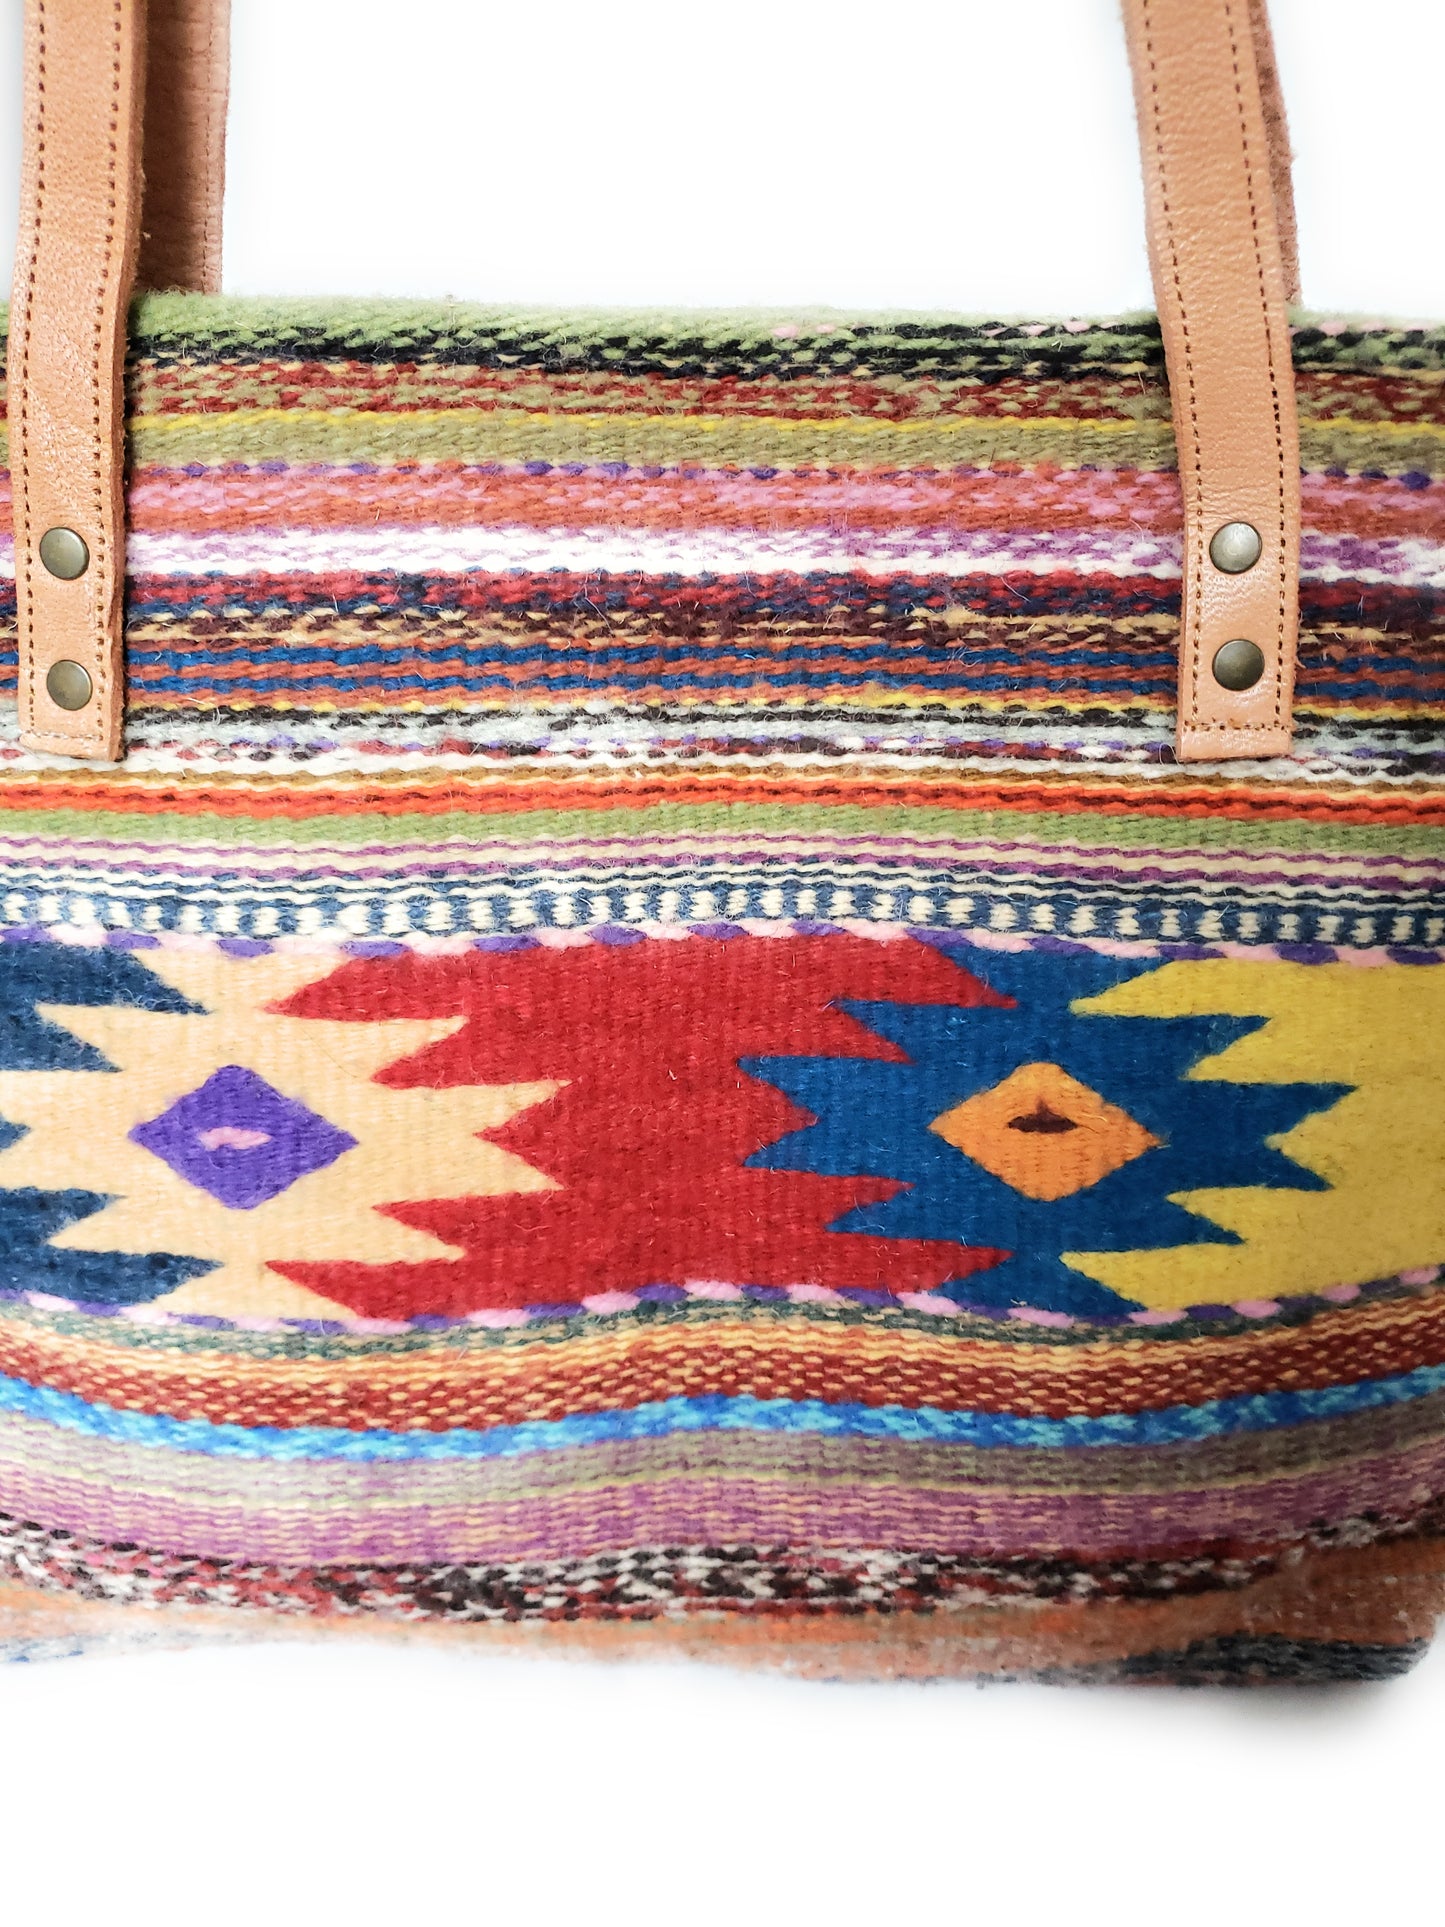 Zapotec Wool  Large Shoulder Tote Bag with Leather Strap